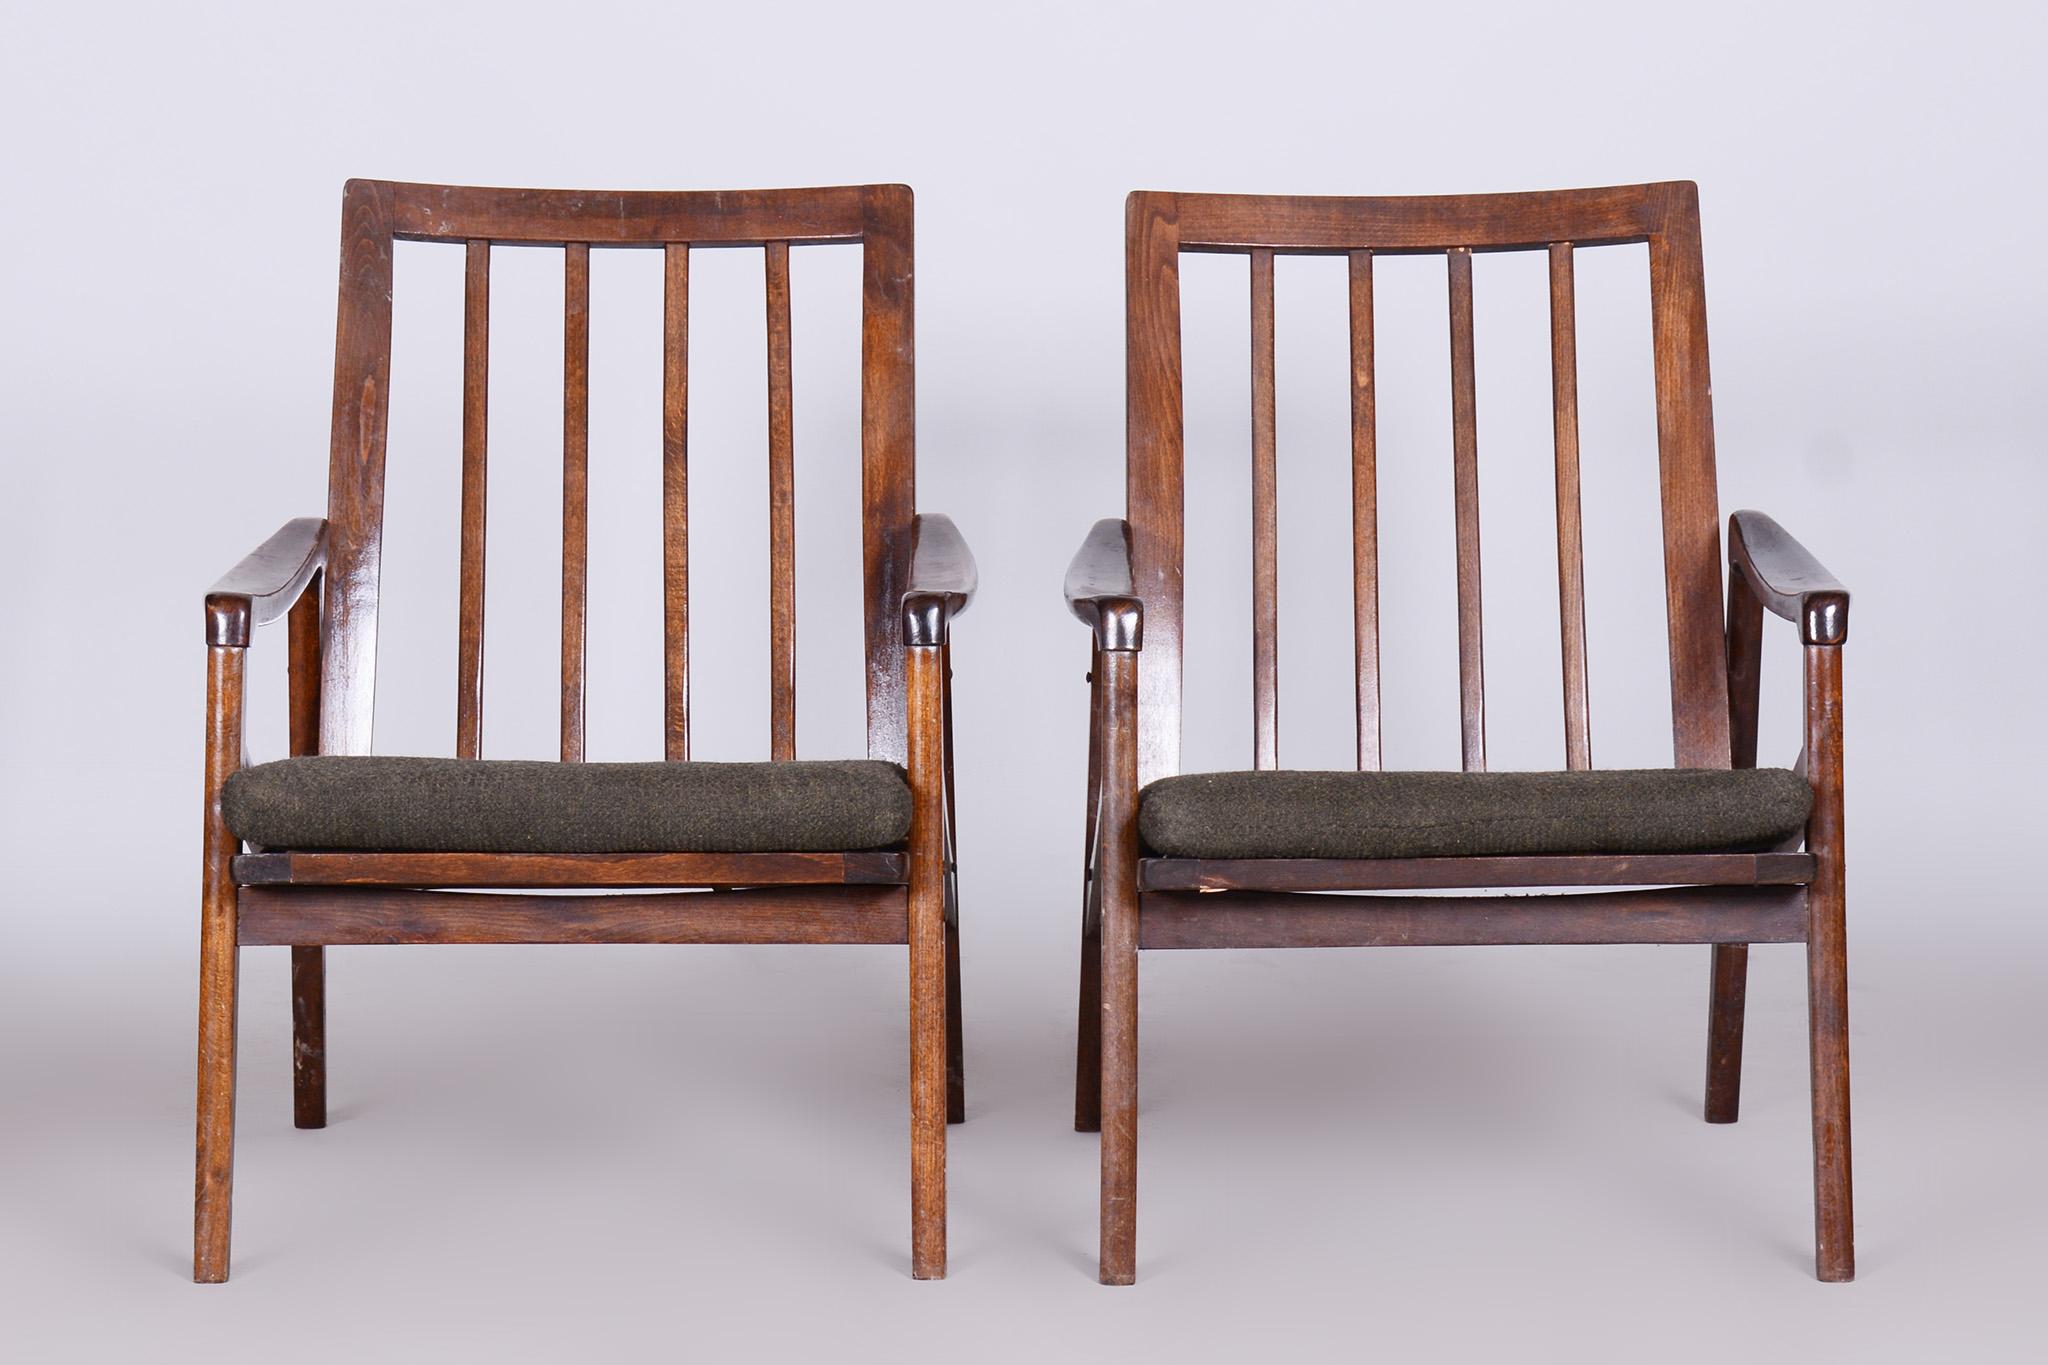 Pair of Mid-Century Armchairs, Stained Beech, Revived Polish, Czechia, 1960s For Sale 1